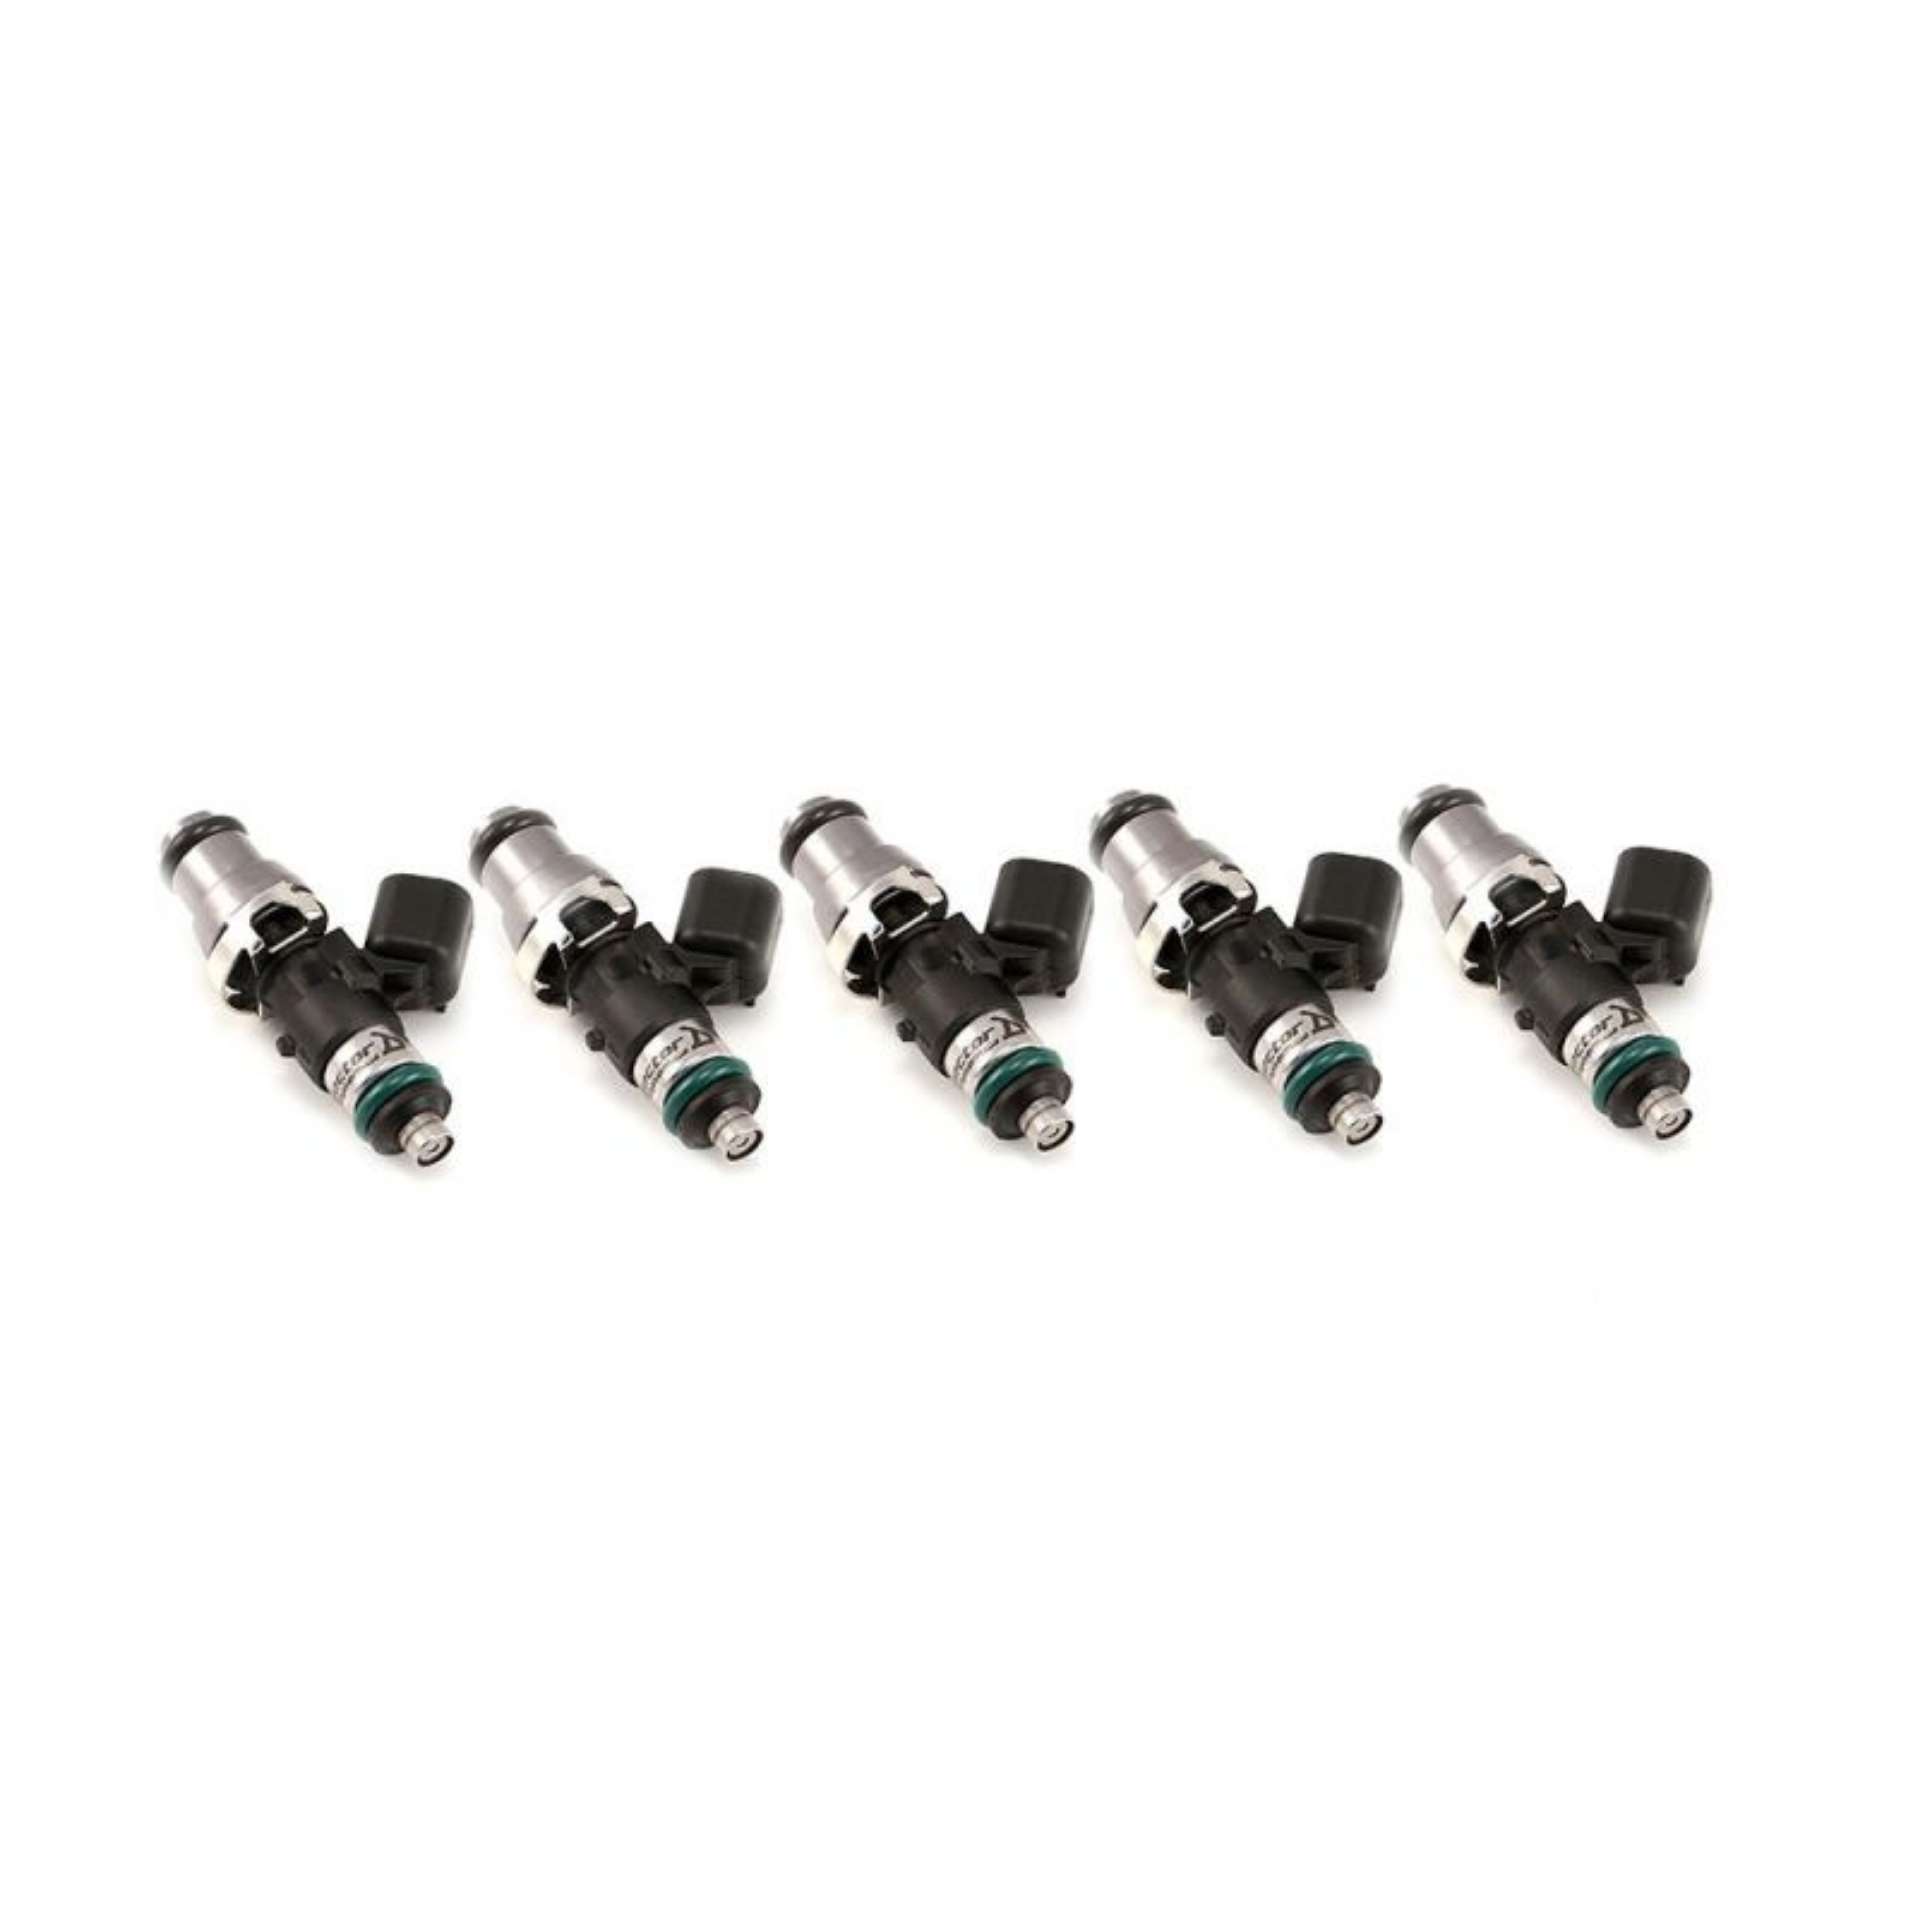 Picture of Injector Dynamics ID1050X Injectors - 48mm Length - 14mm Top - 14mm Lower Set of 5